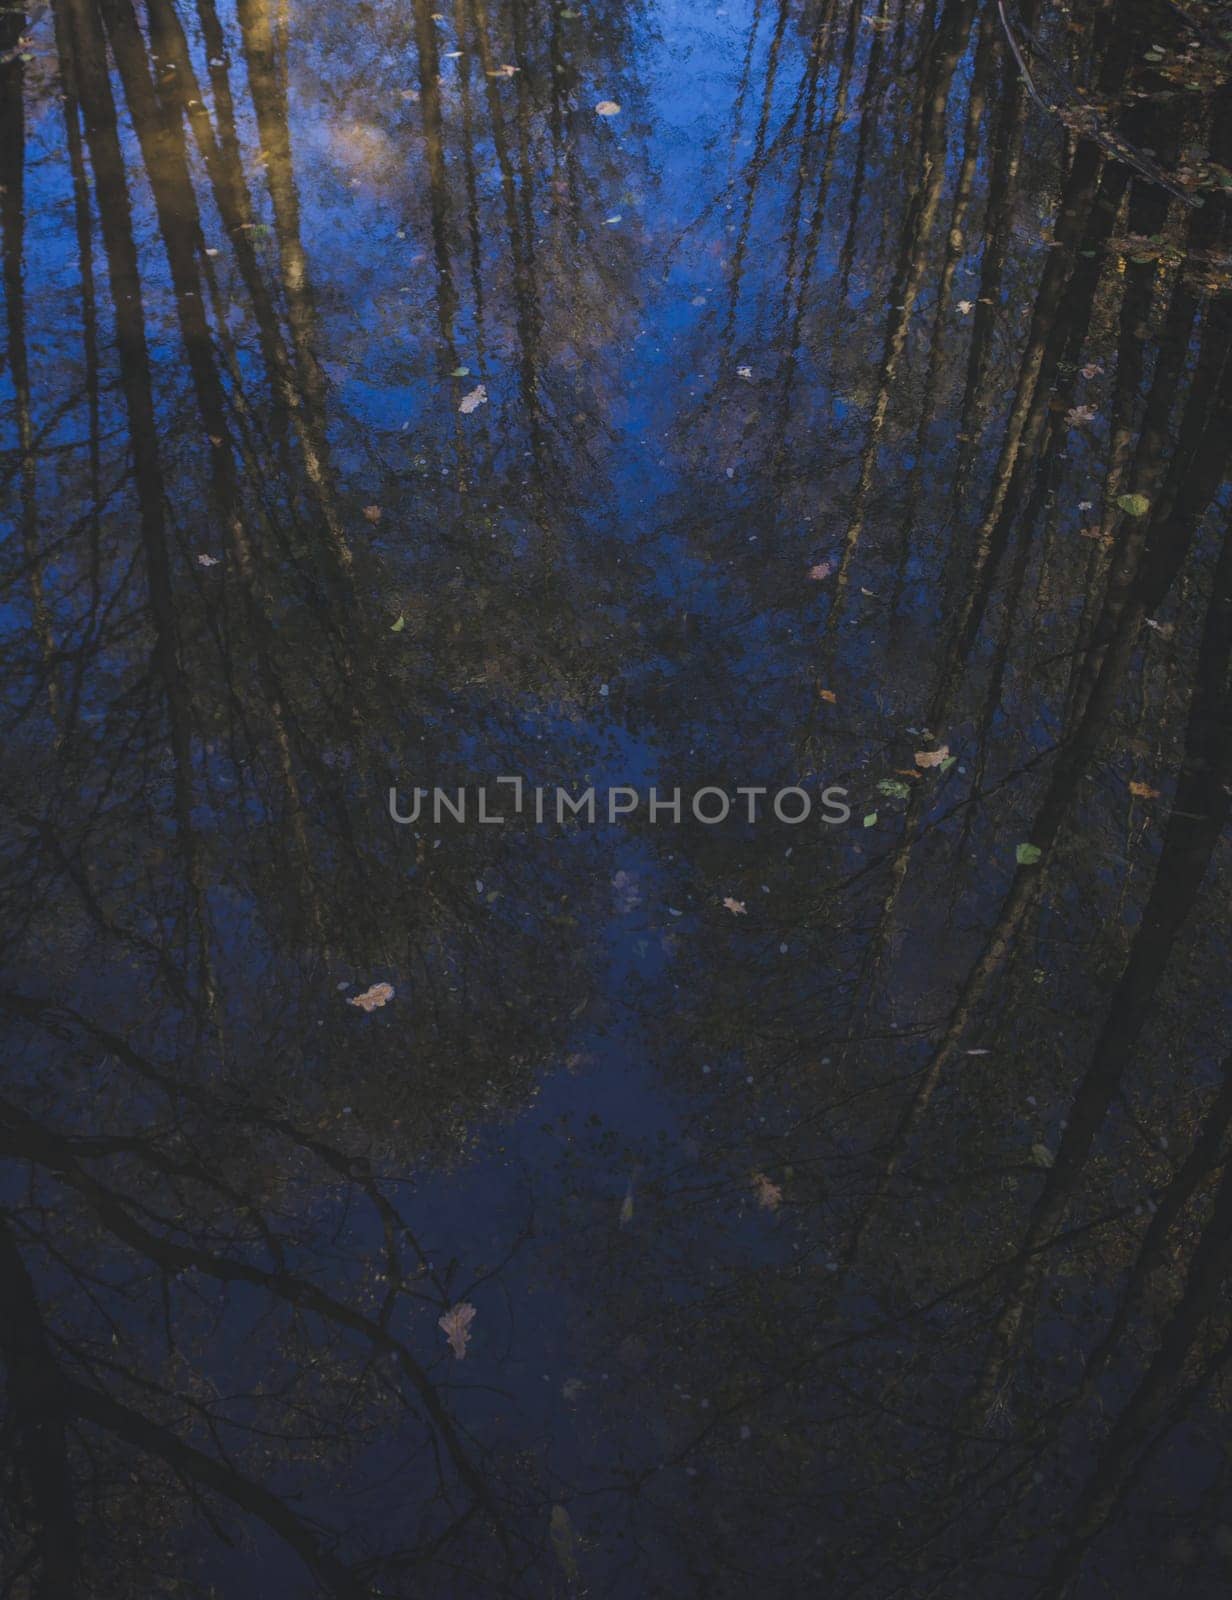 autumn landscape. the trees are reflected in the blue water